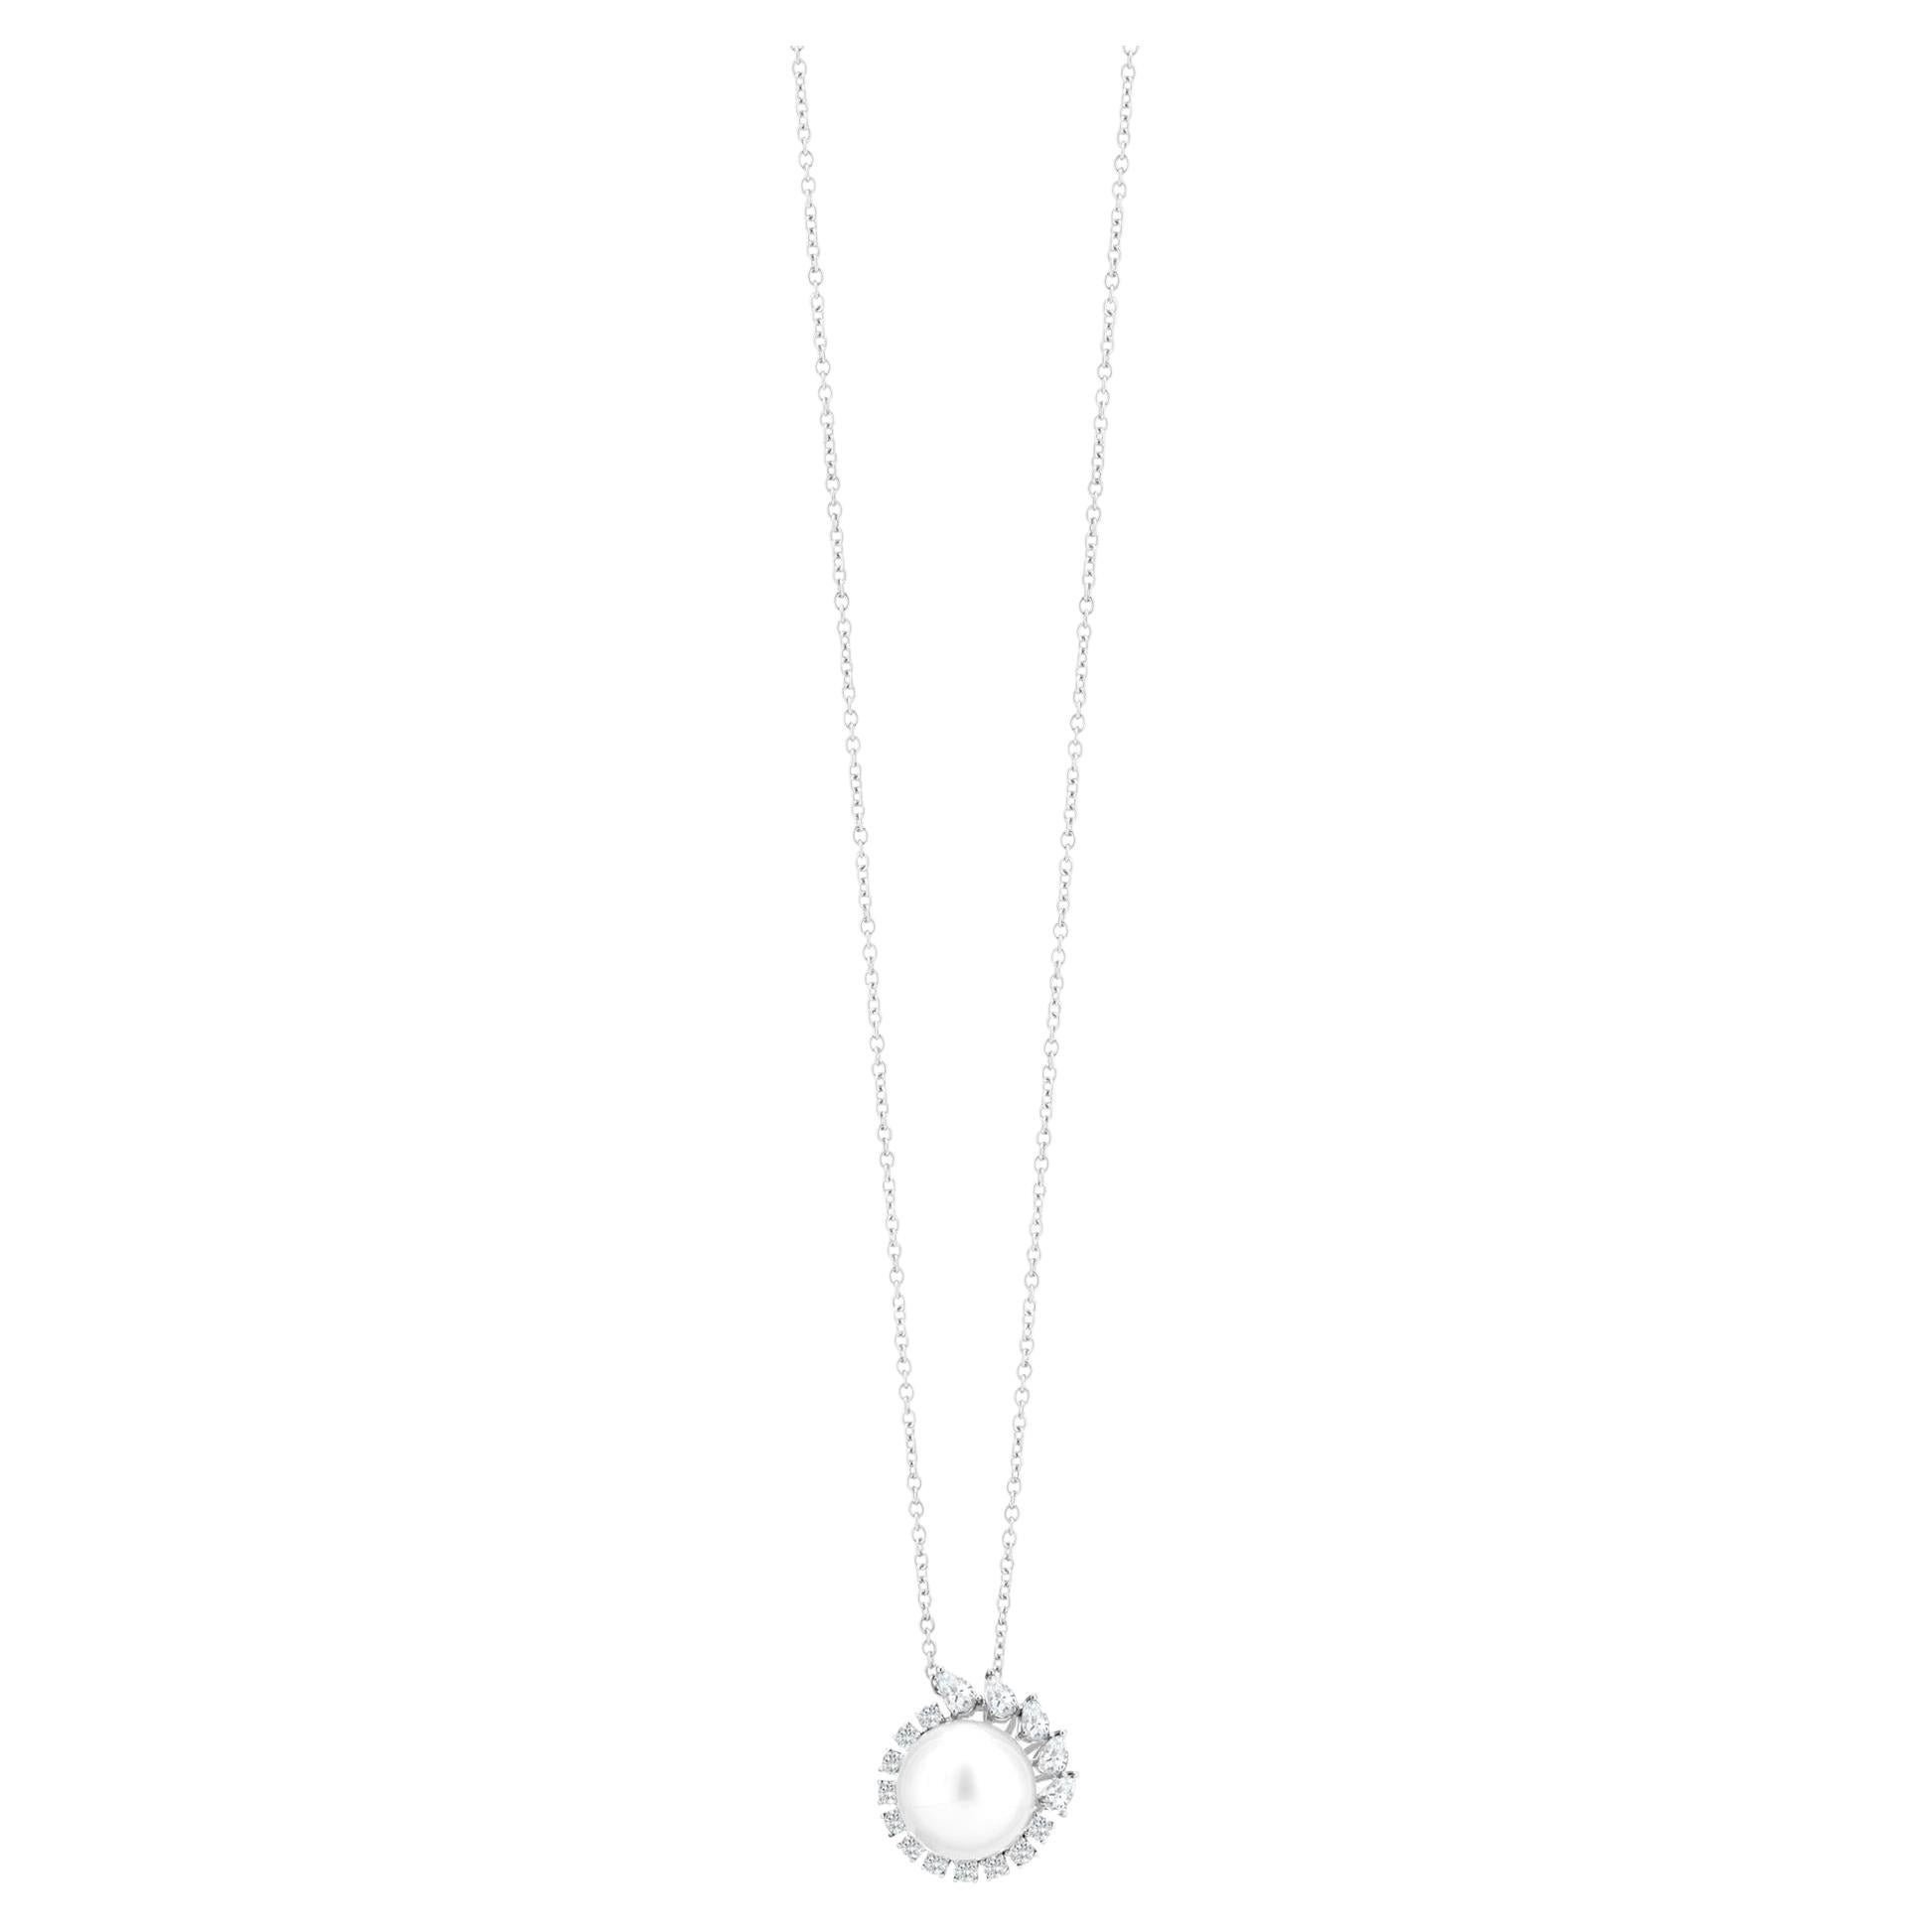 Elevate your elegance with the exquisite Gemistry South Sea Pearl and Diamond Pendant Necklace in 18k White Gold. This masterpiece combines luxury and allure, making it an essential addition to your jewelry collection.

The pendant necklace boasts